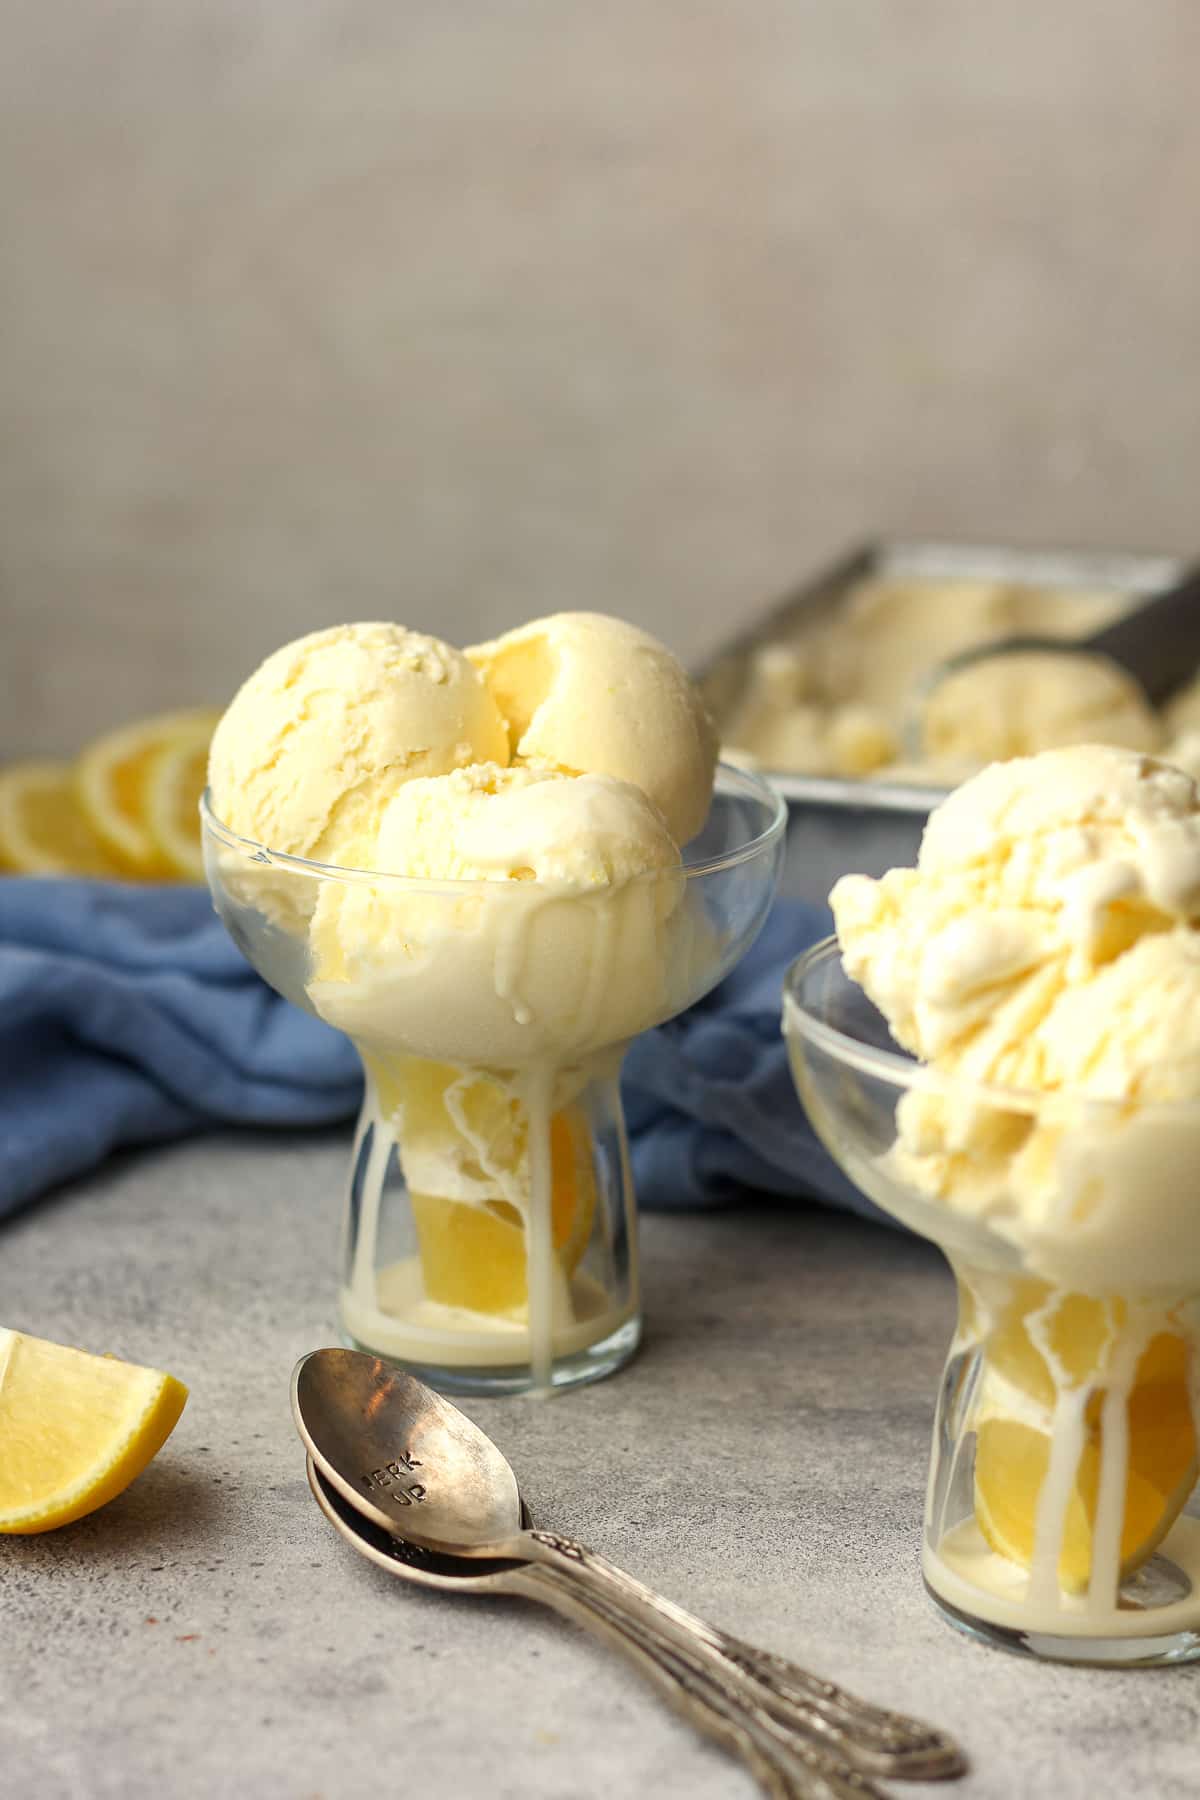 Side view of two bowls of lemon ice cream.